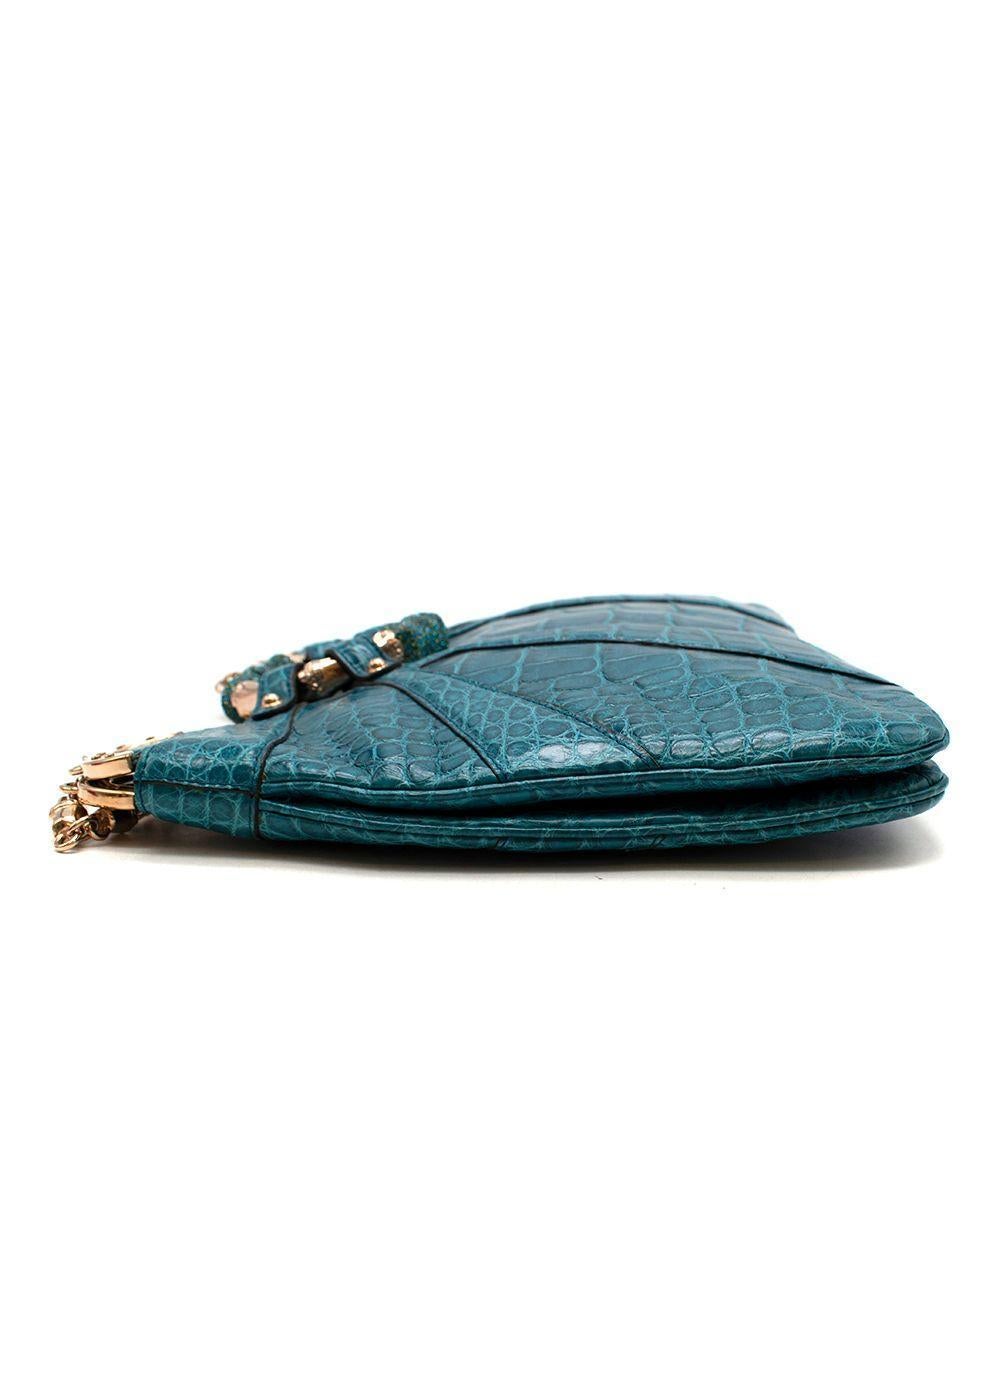 Women's or Men's 2004 Vintage Iconic Tom Ford for Gucci teal crocodile bag